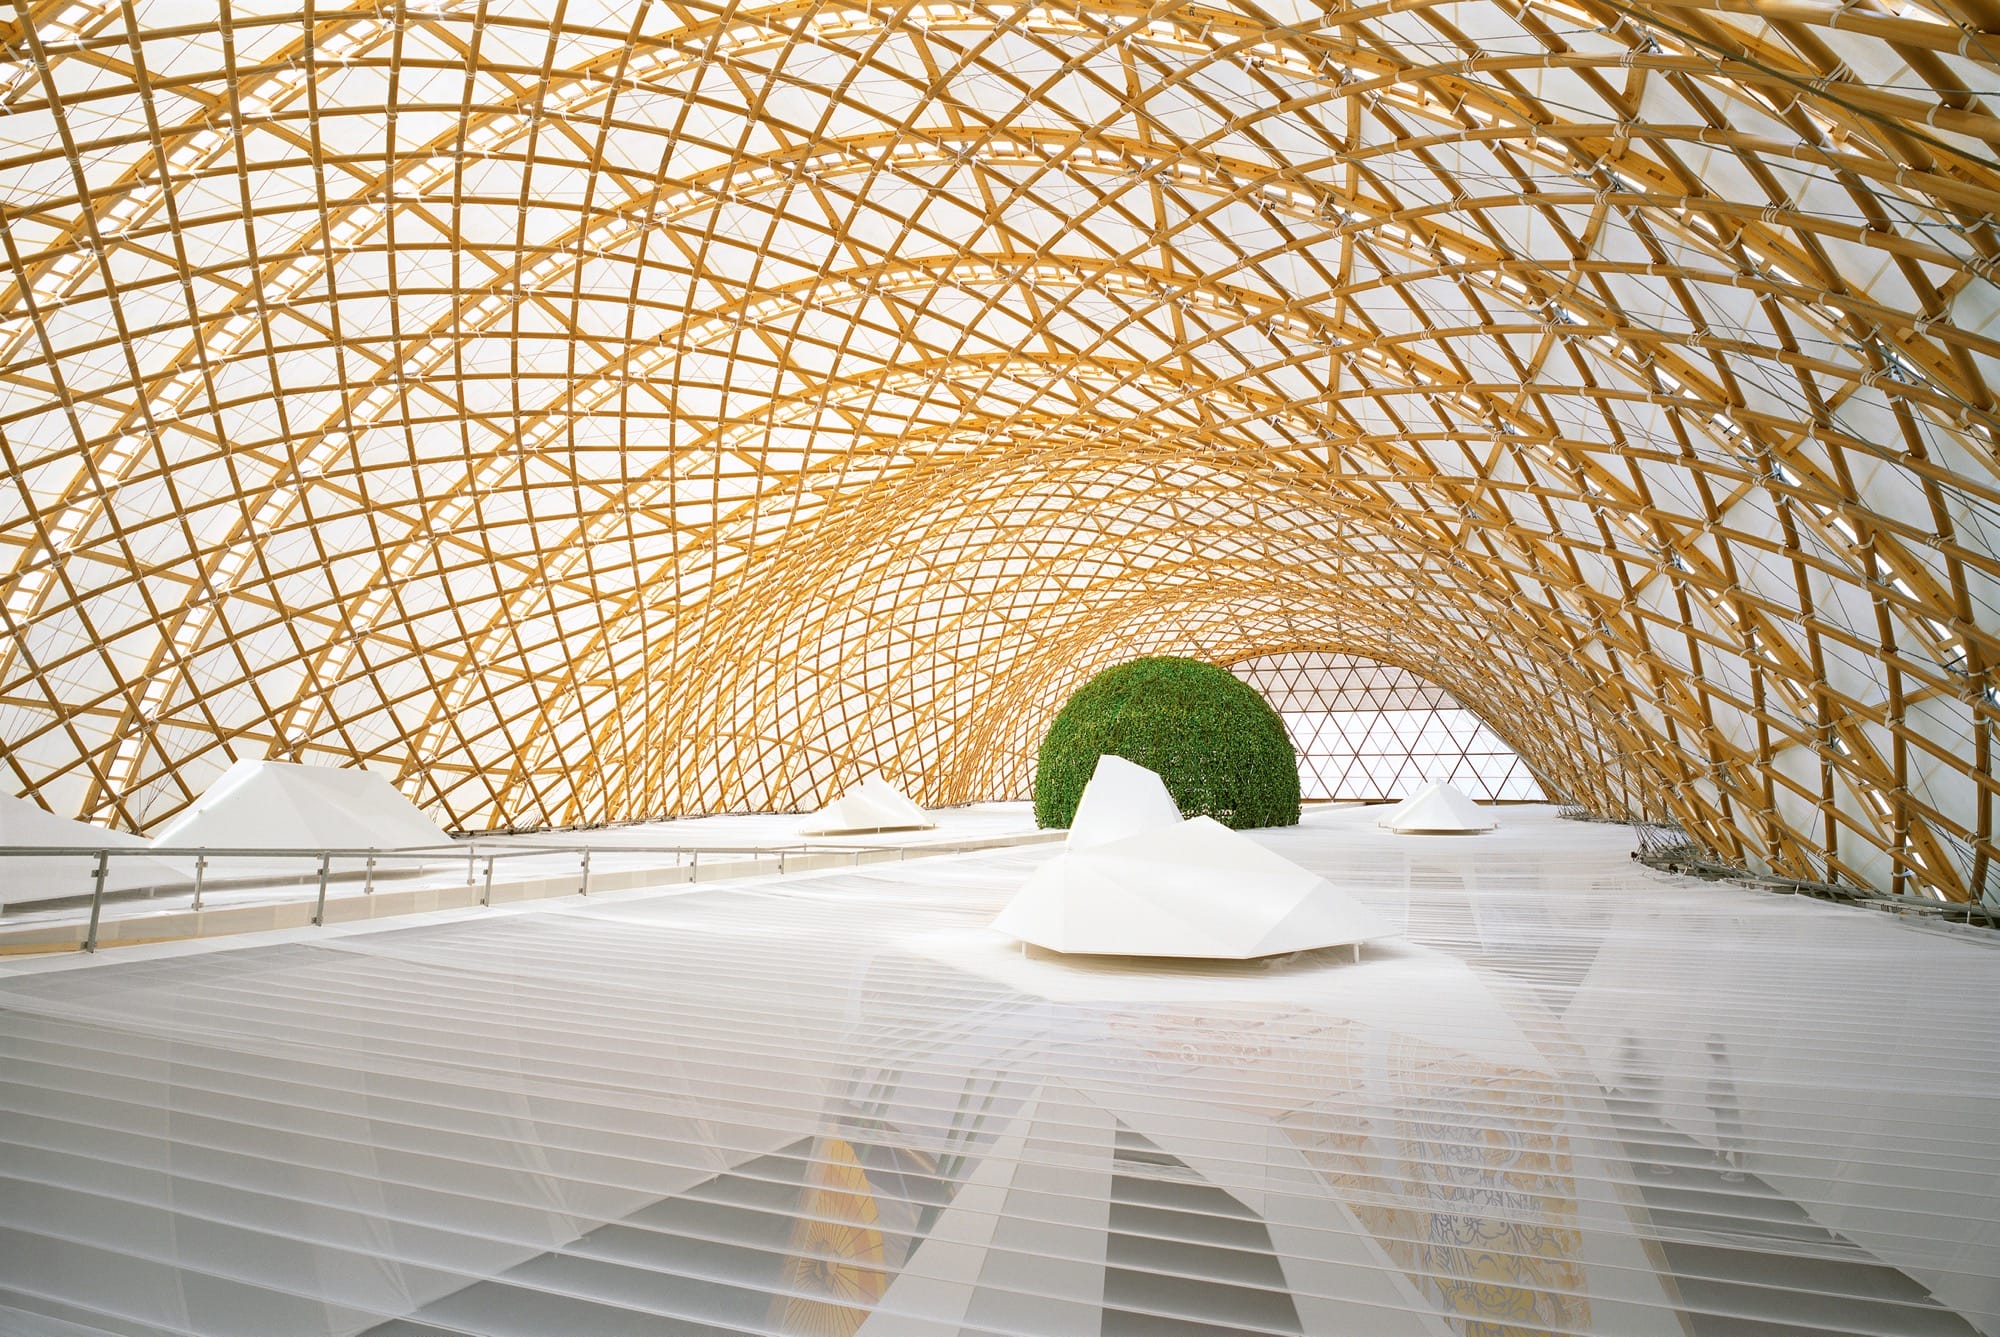 the interior of the Japan Pavilion at Expo 2000 in Hanover, showing a long, arched interior with white floors and a ceiling of latticework